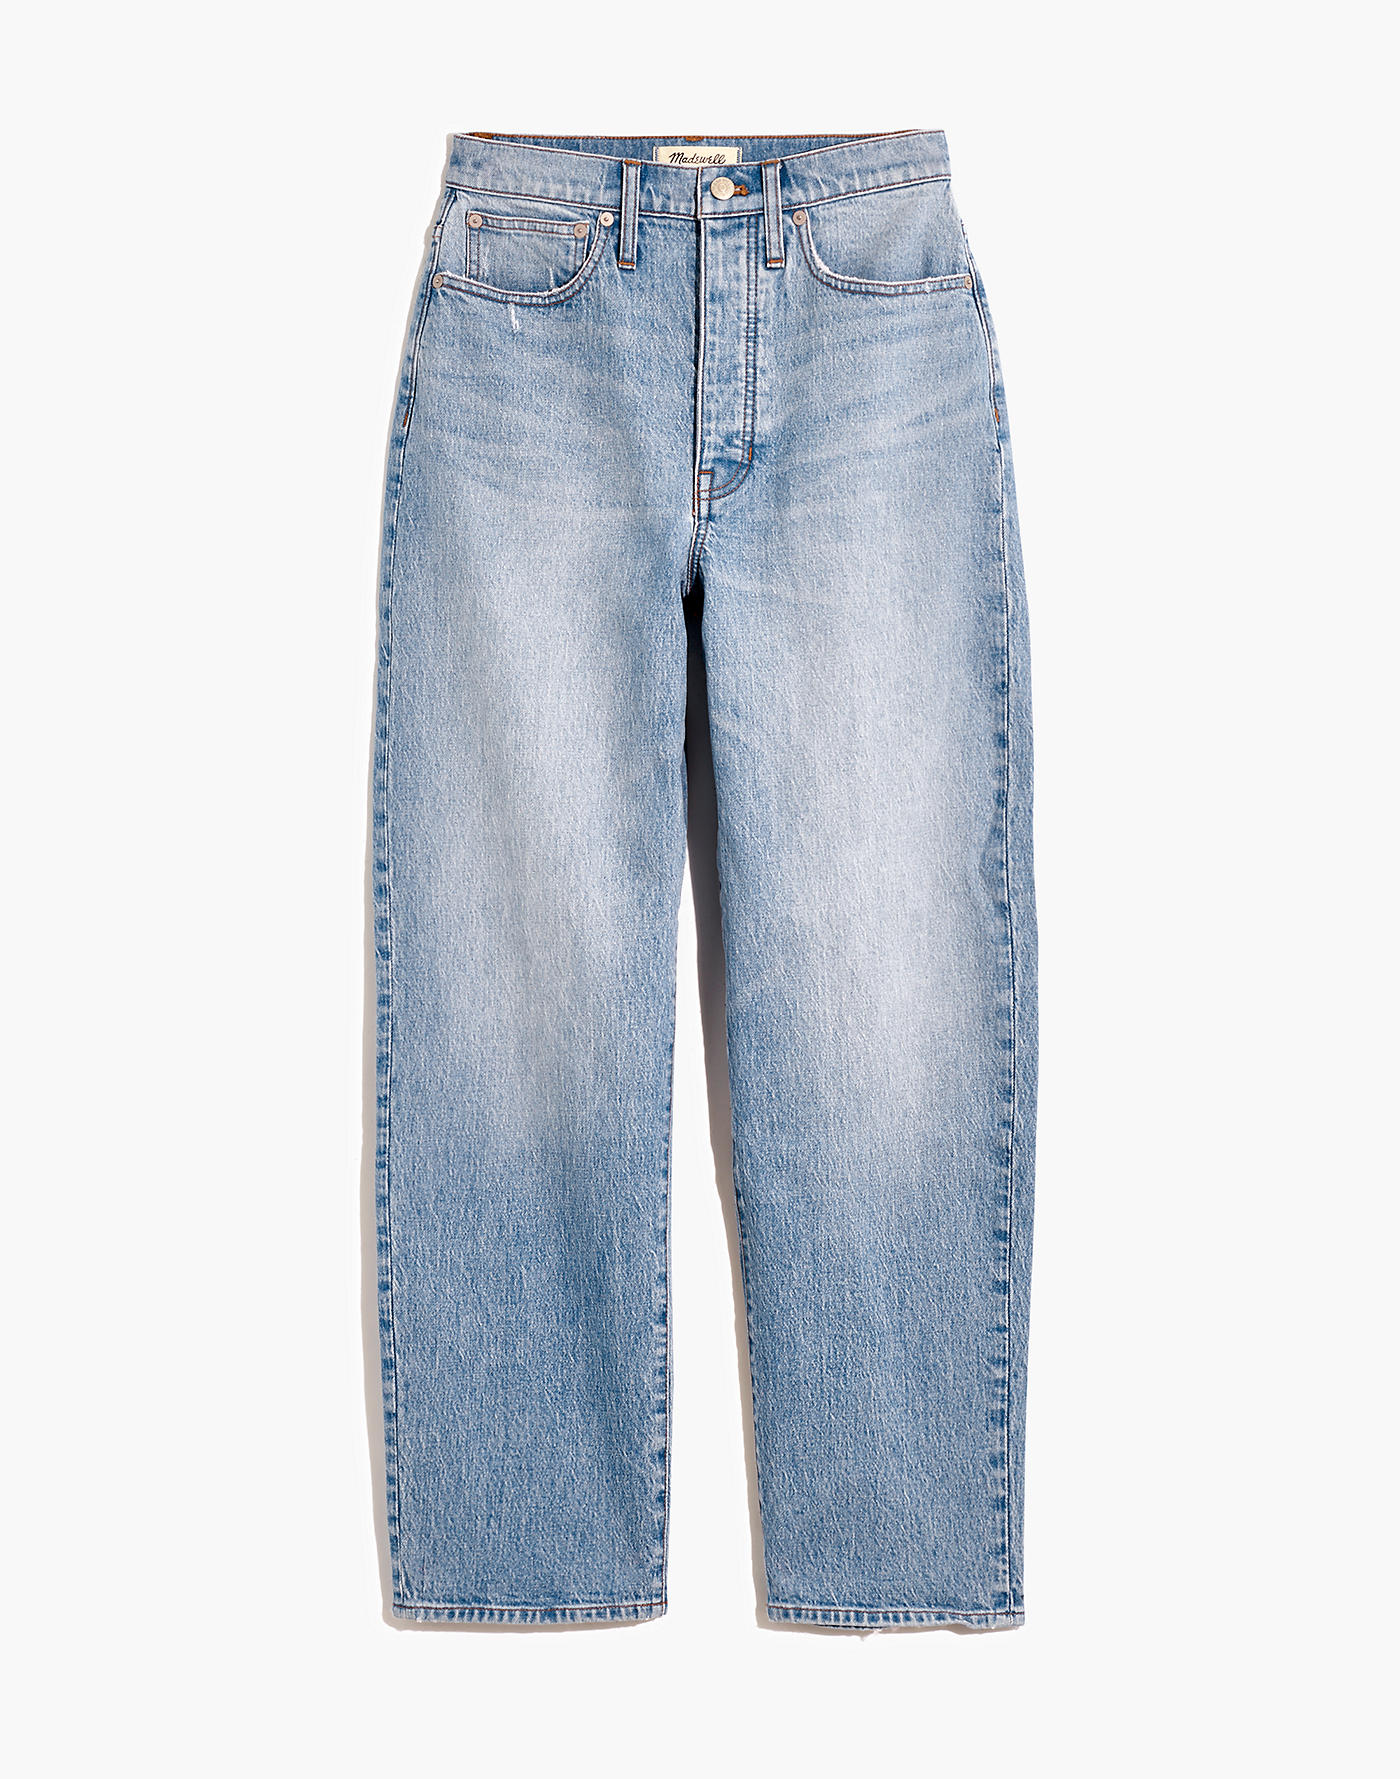 Madewell Balloon Jeans in Hewes Wash